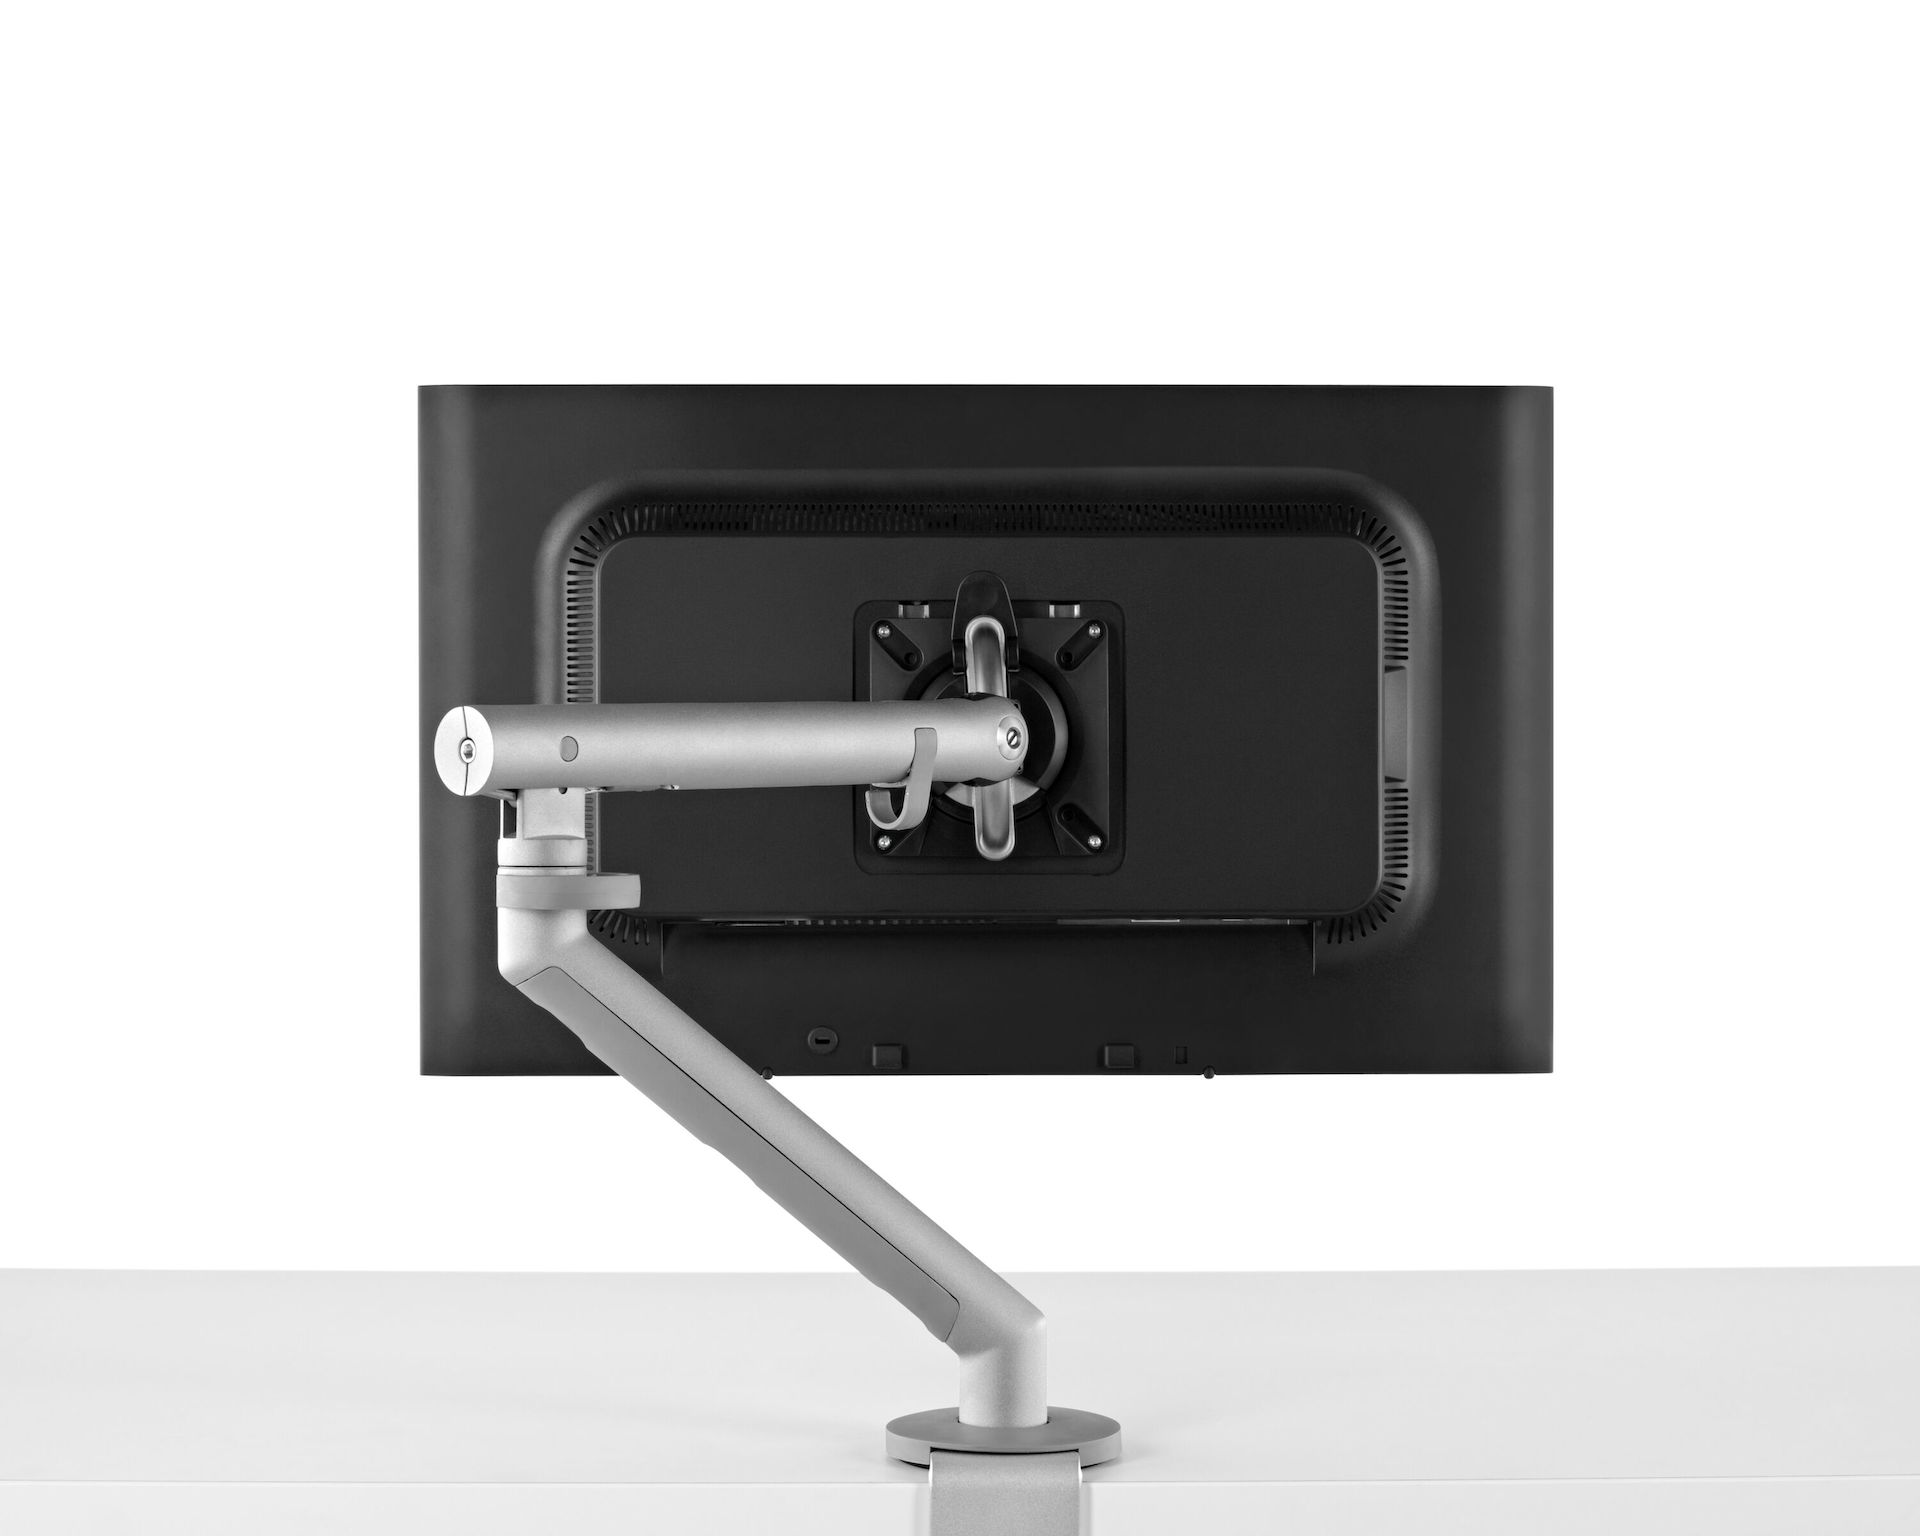 CBS Flo Monitor Arm from Posturite, monitor arm 